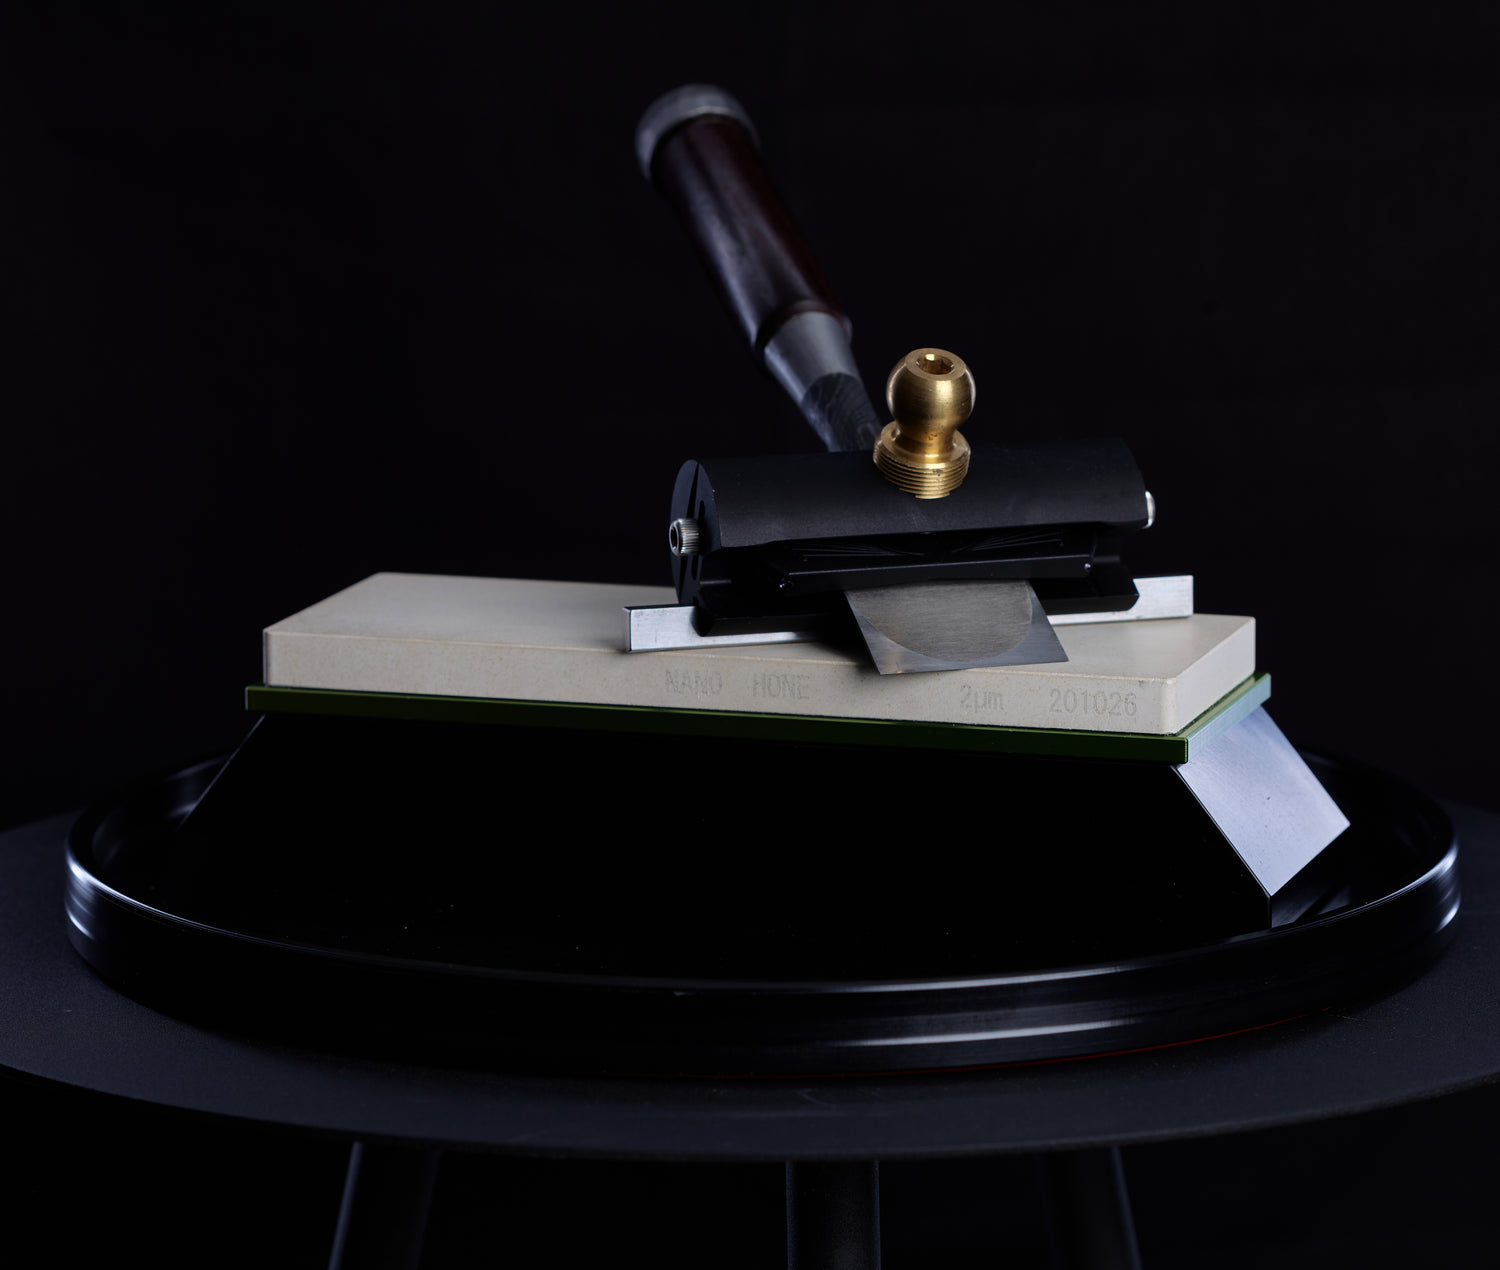 The Sharp Skate honing jig holds a chisel flat onto a sharpening stone to reveal how sharp the edge is